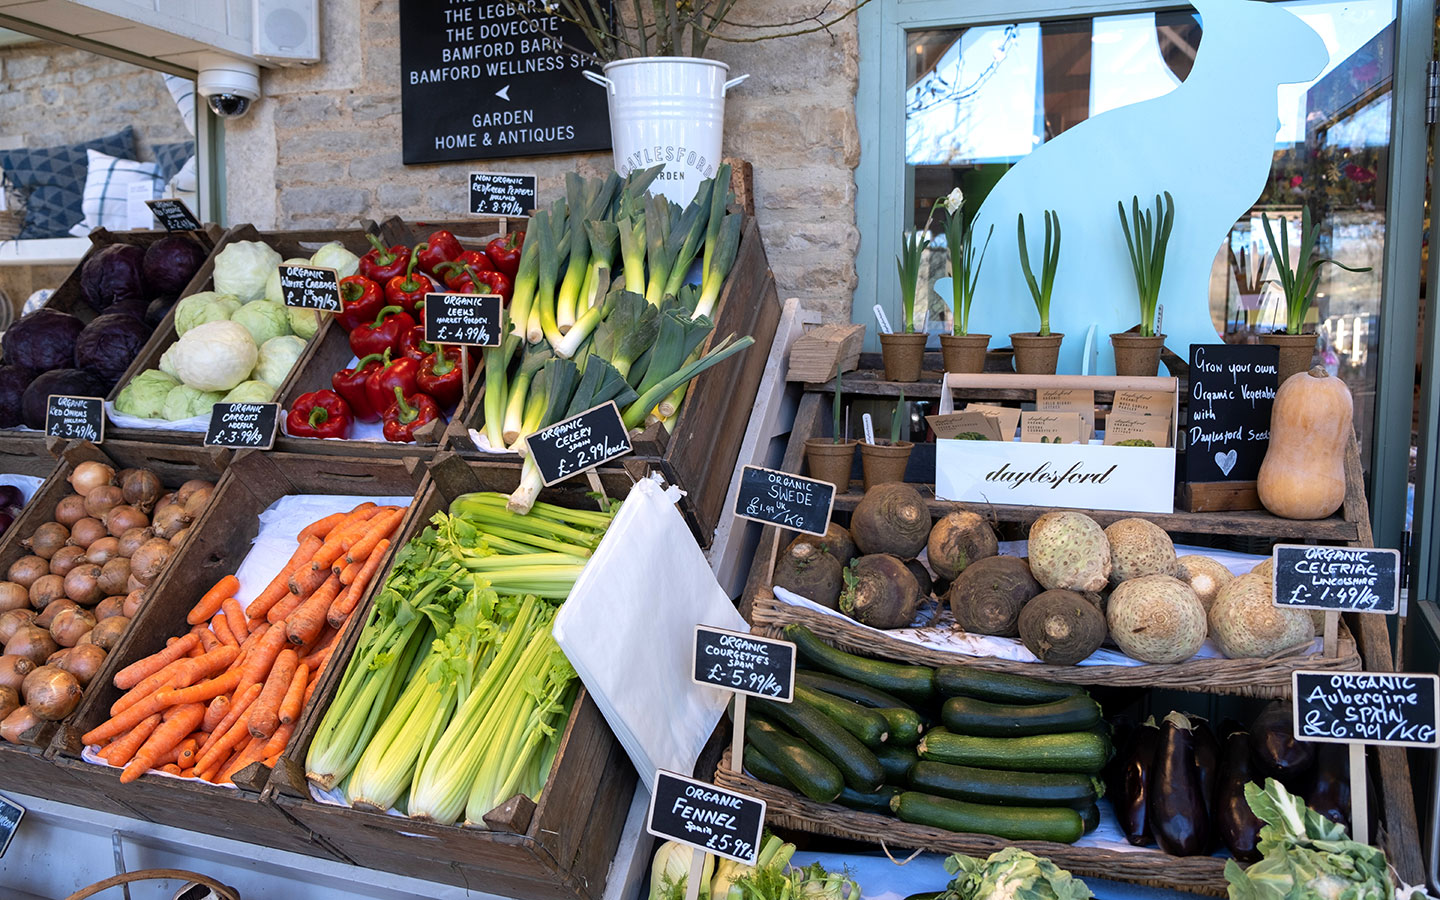 Organic produce at the Daylesford farm shop in the Cotswolds